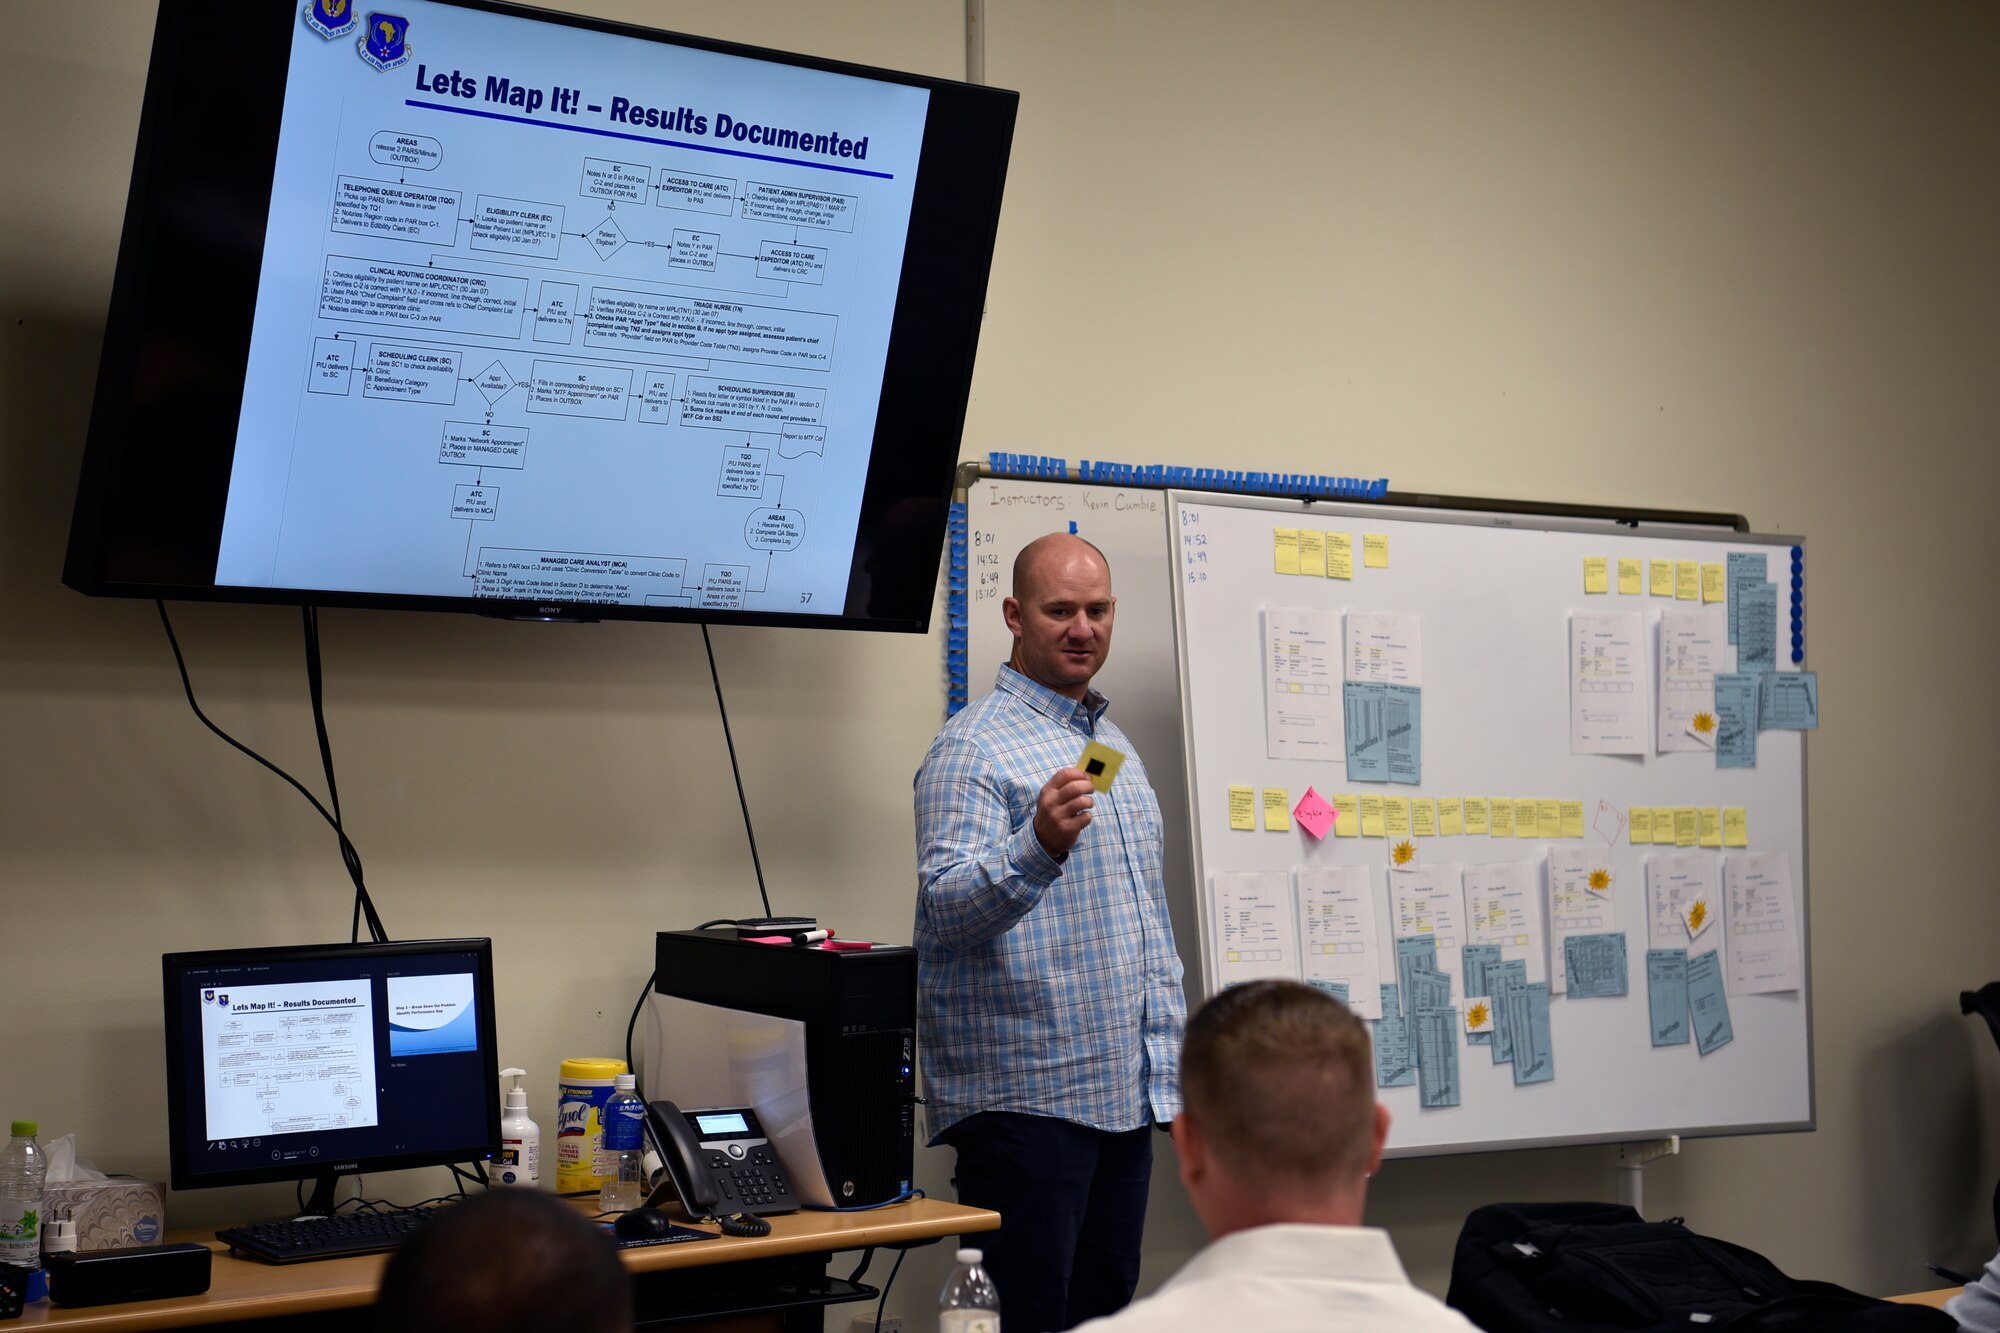 U.S. Air Force Master Sgt. Kevin Cumbie, 52nd Fighter Wing innovation and transformation office superintendent, provides an example of how to map a problem during the Continuous Process Improvement class at Kunsan Air Base, Republic of Korea, July 11, 2019. For this eight-hour class, Cumbie demonstrated the first three steps of Practical Problem Solving as a foundation for improving processes in the work place. (U.S. Air Force photo by Technical Sgt. Joshua P. Arends)